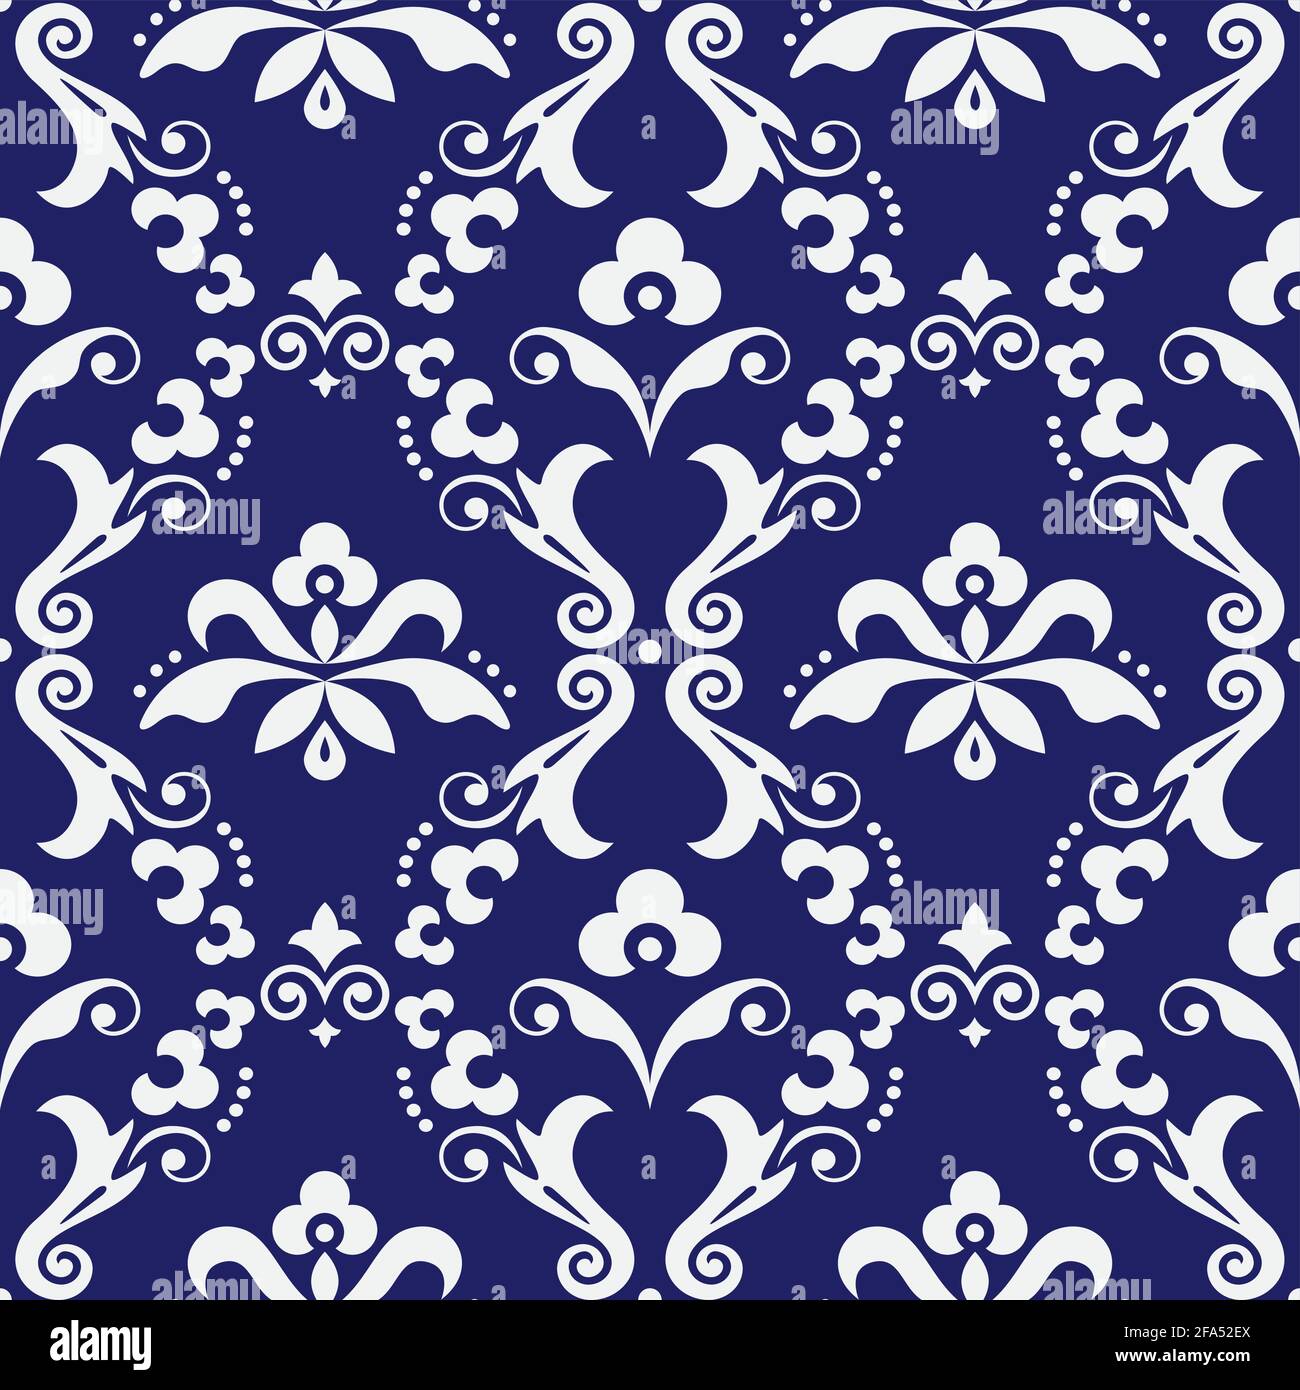 Damask  vector seamless textile or farbic print pattern, old victorian repetitive design with flowers, swirls and leaves in white on navy blue Stock Vector